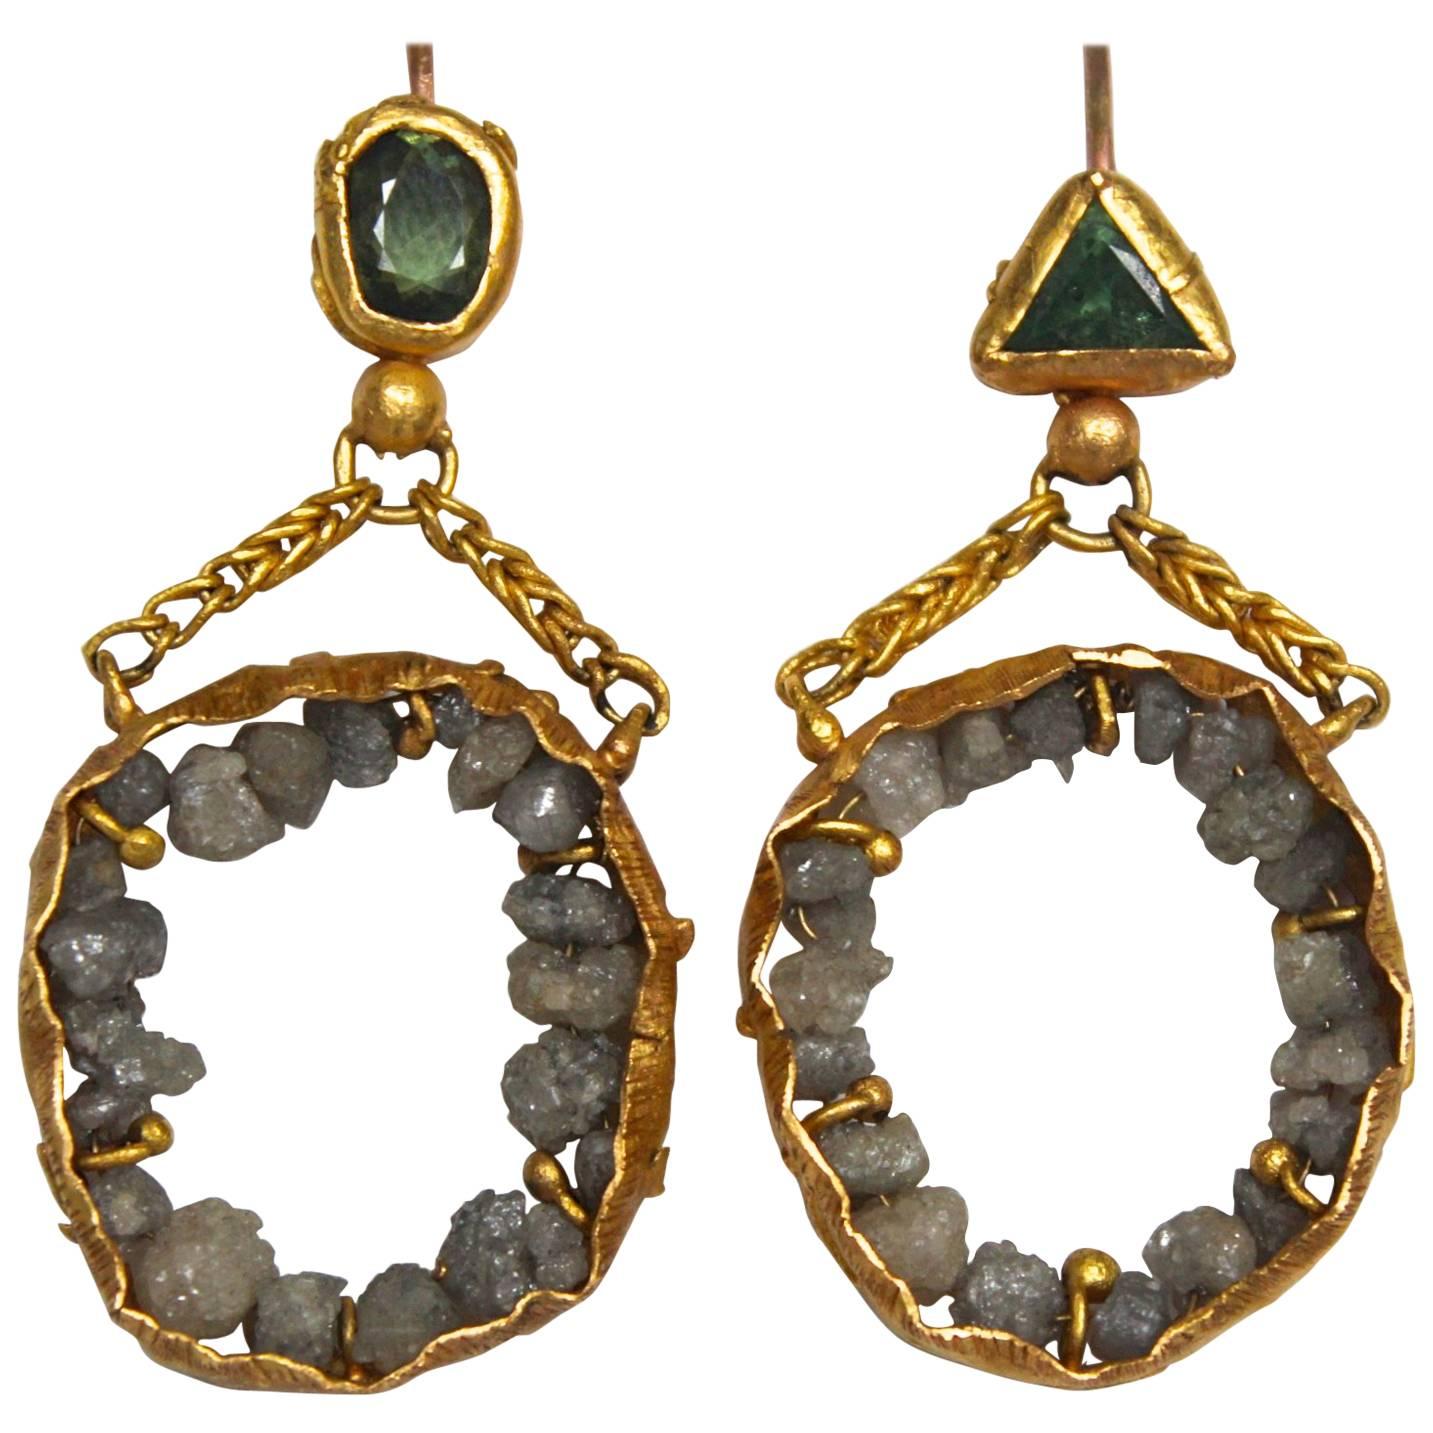 Untitled Earrings. Fun, asymmetrical diamond 21k solid gold dangle chandelier earrings featuring demantoid garnets and grey raw diamonds. Perfect for every day. Their neutral subtle color allows easy coordination with any outfit. Show off your